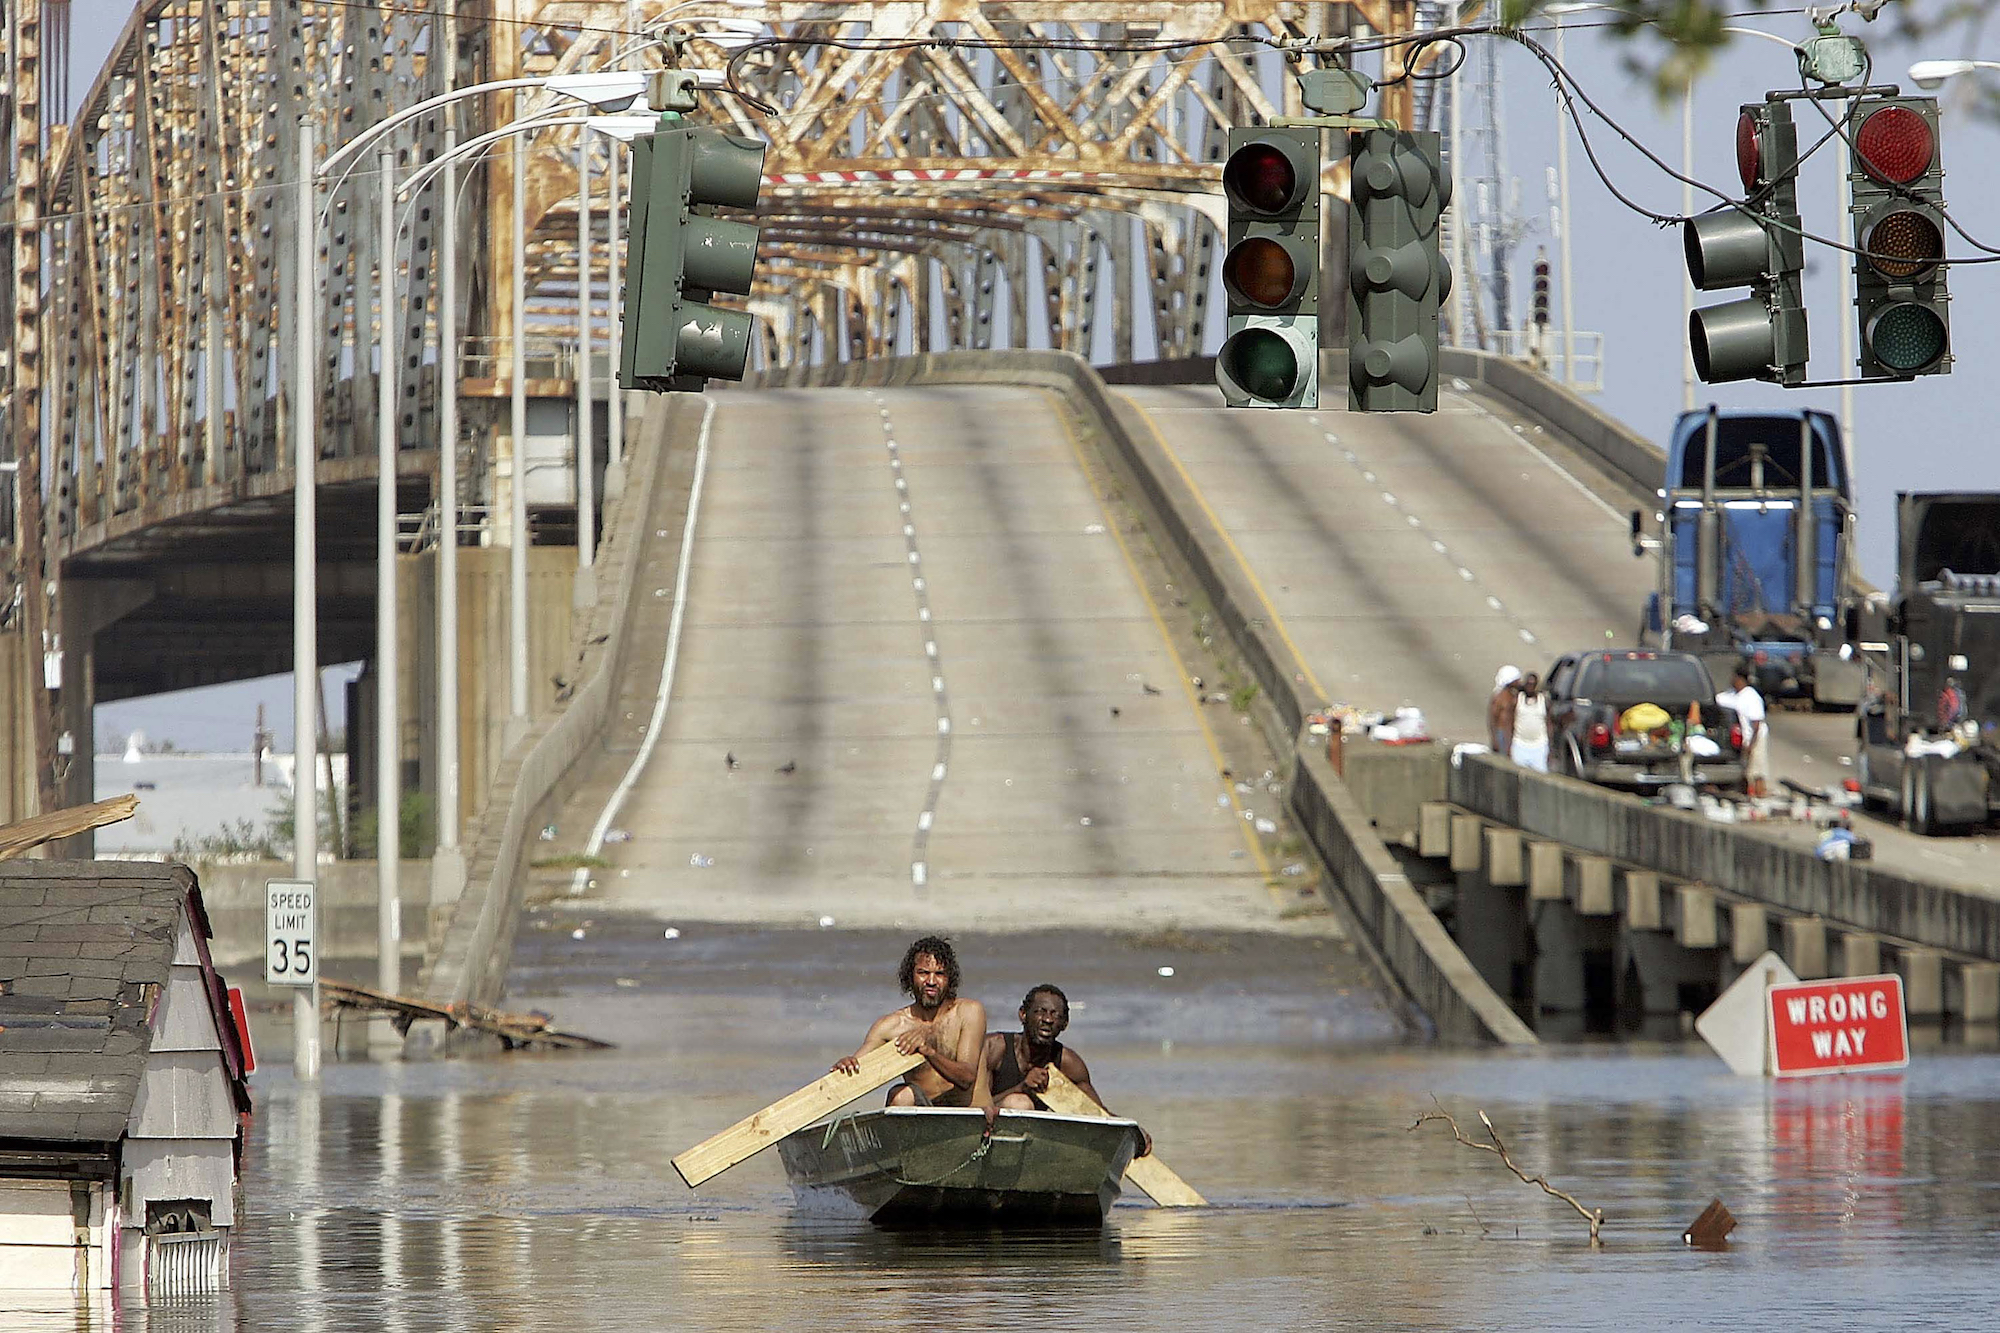 wo men paddle through New Orleans after Hurricane Katrina